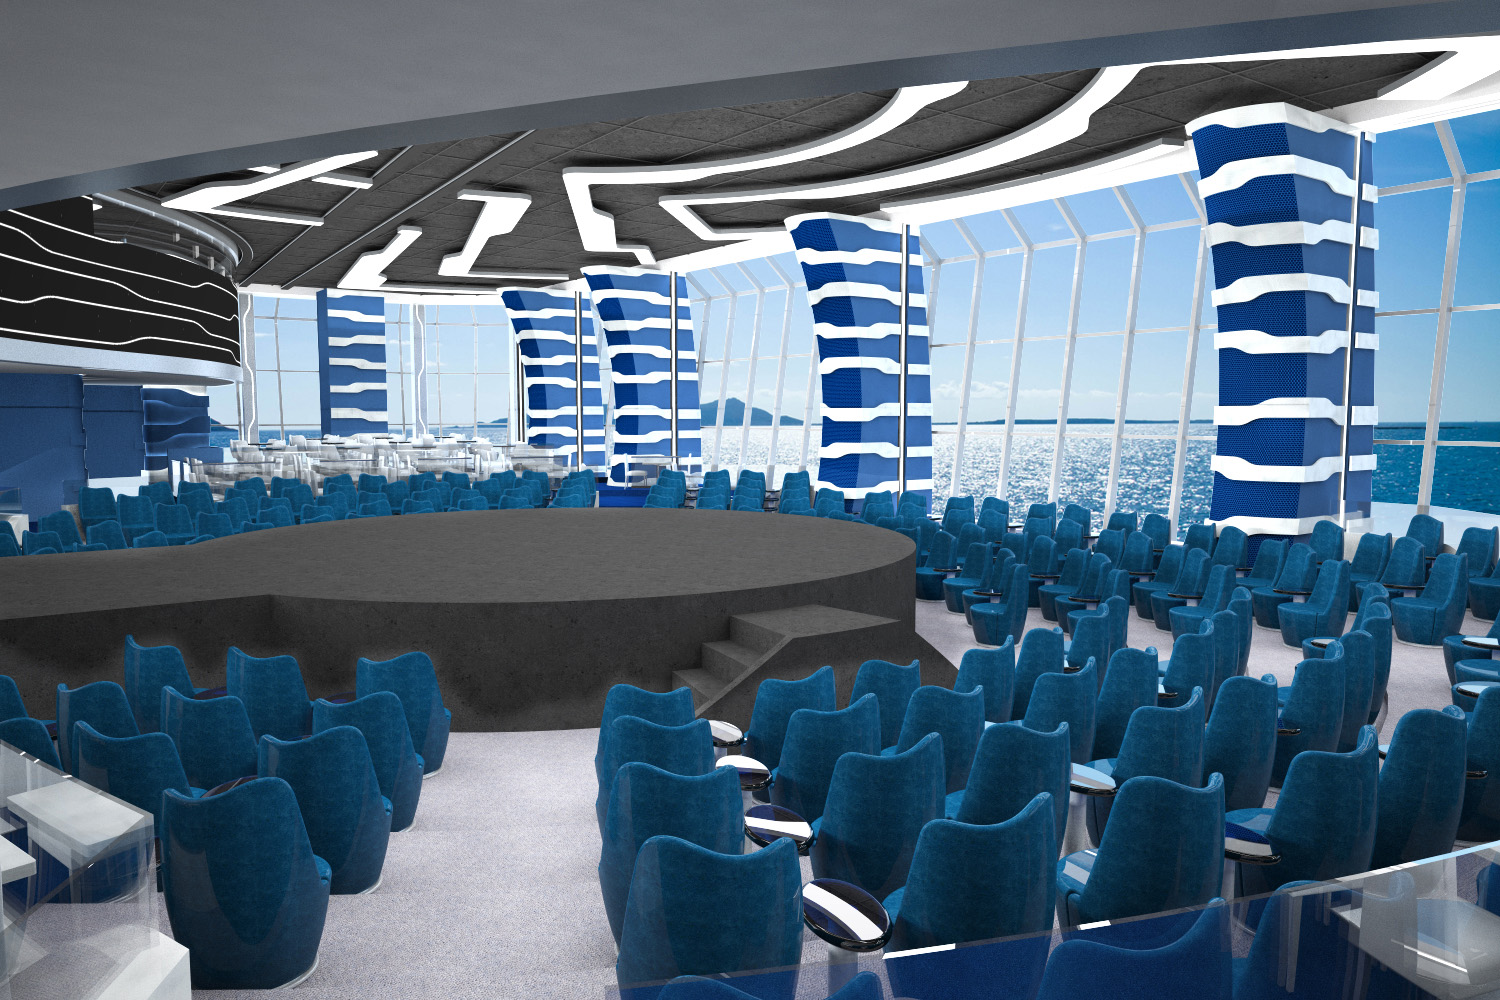 The purpose-built Carousel Lounge onboard MSC Meraviglia was designed to meet the specific performance needs of Cirque du Soleil.